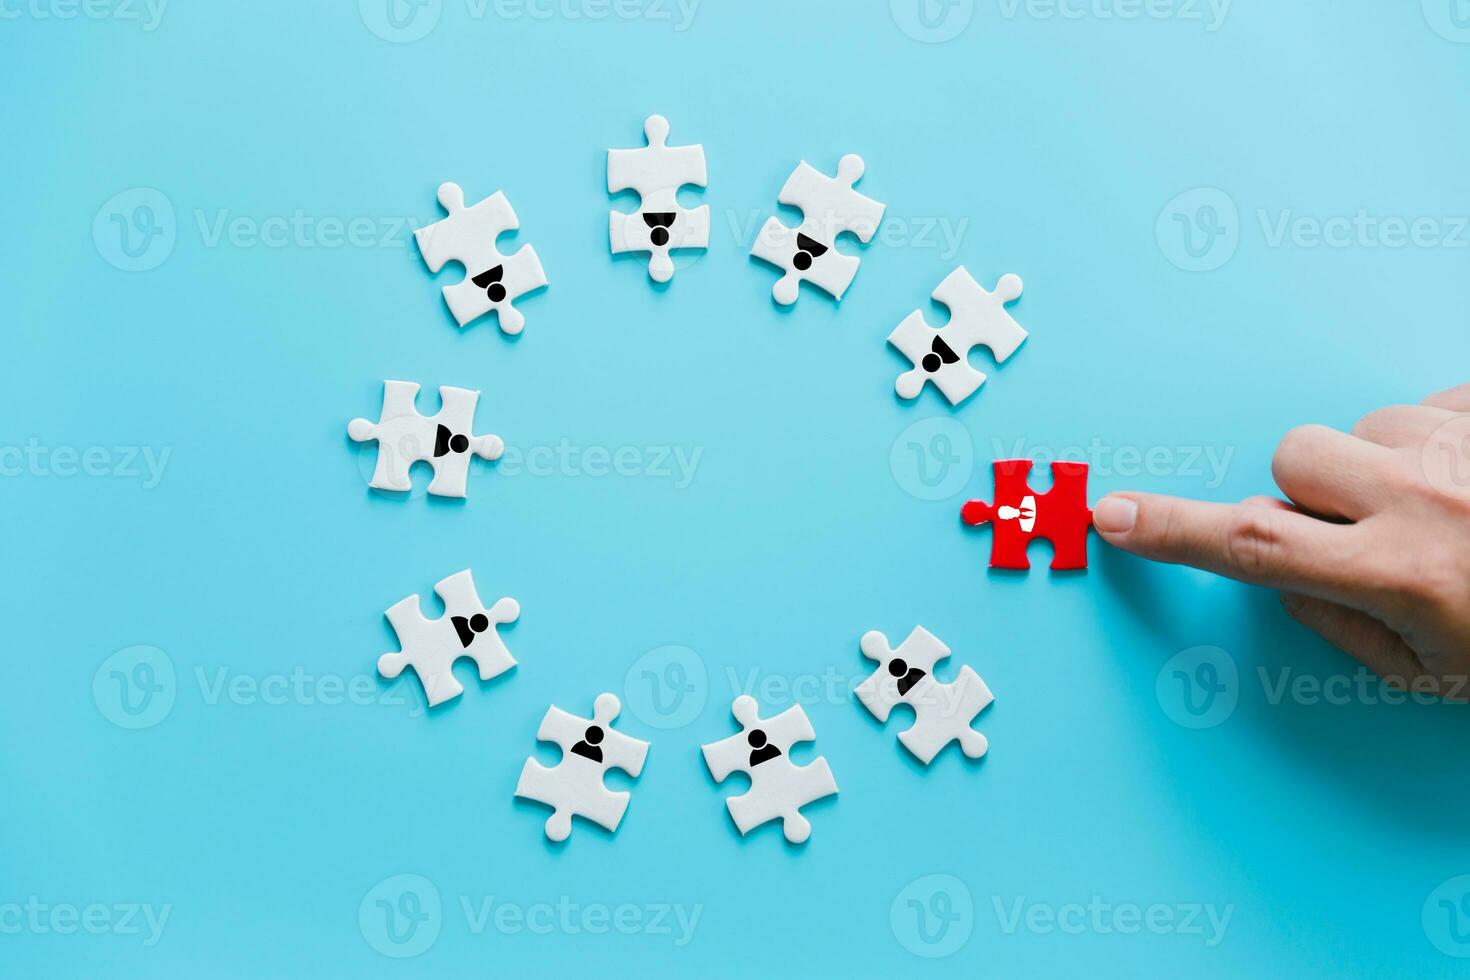 Human resources management and recruitment business build team concept. Image of tangram puzzle blocks with people icons over wooden table ,human resources and management concept. photo